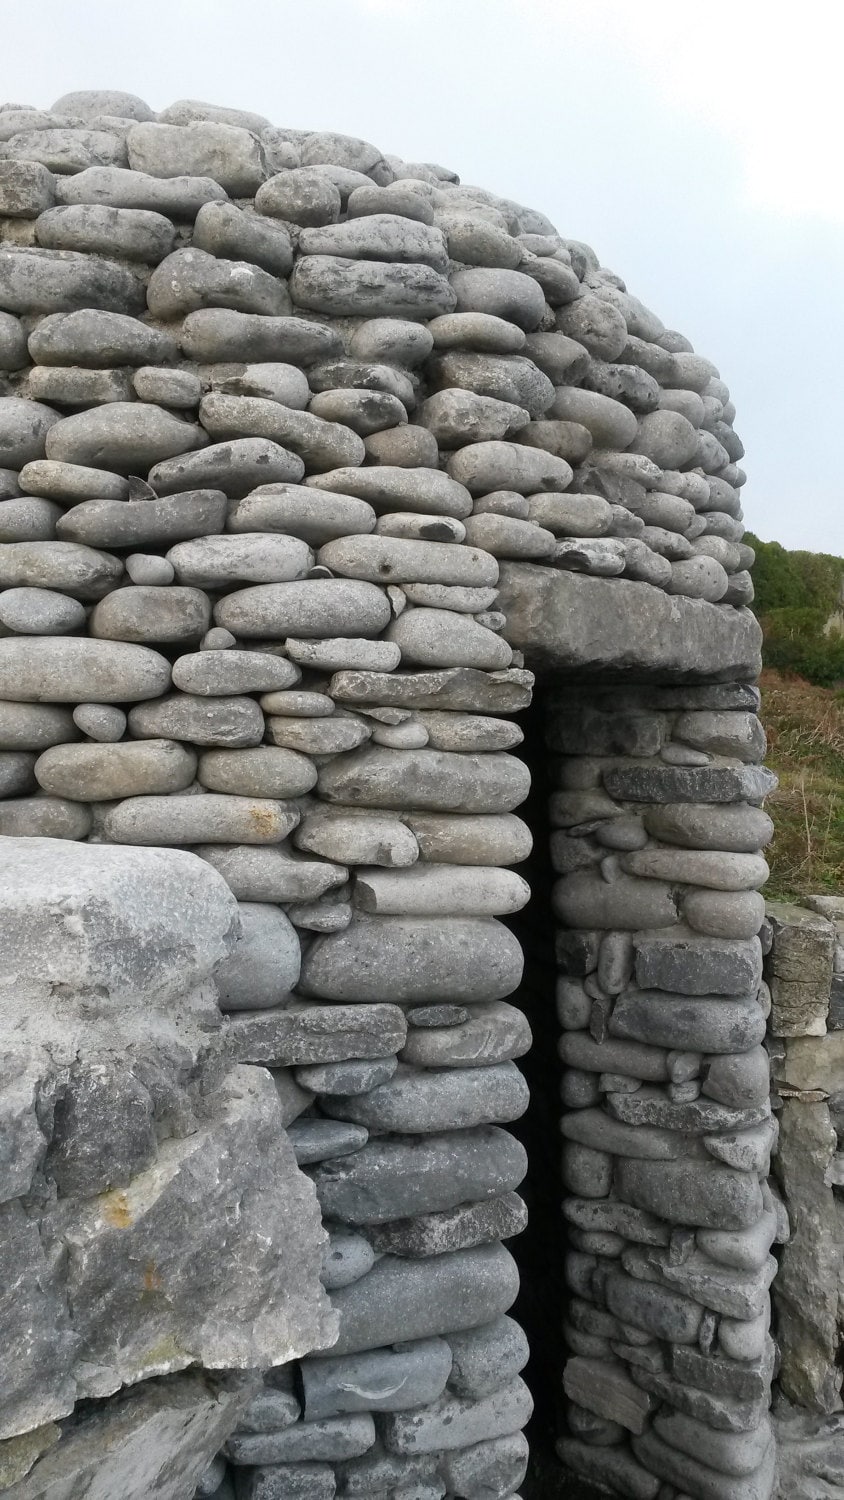 The little stone meditation hut by the lake on Inis Oirr.